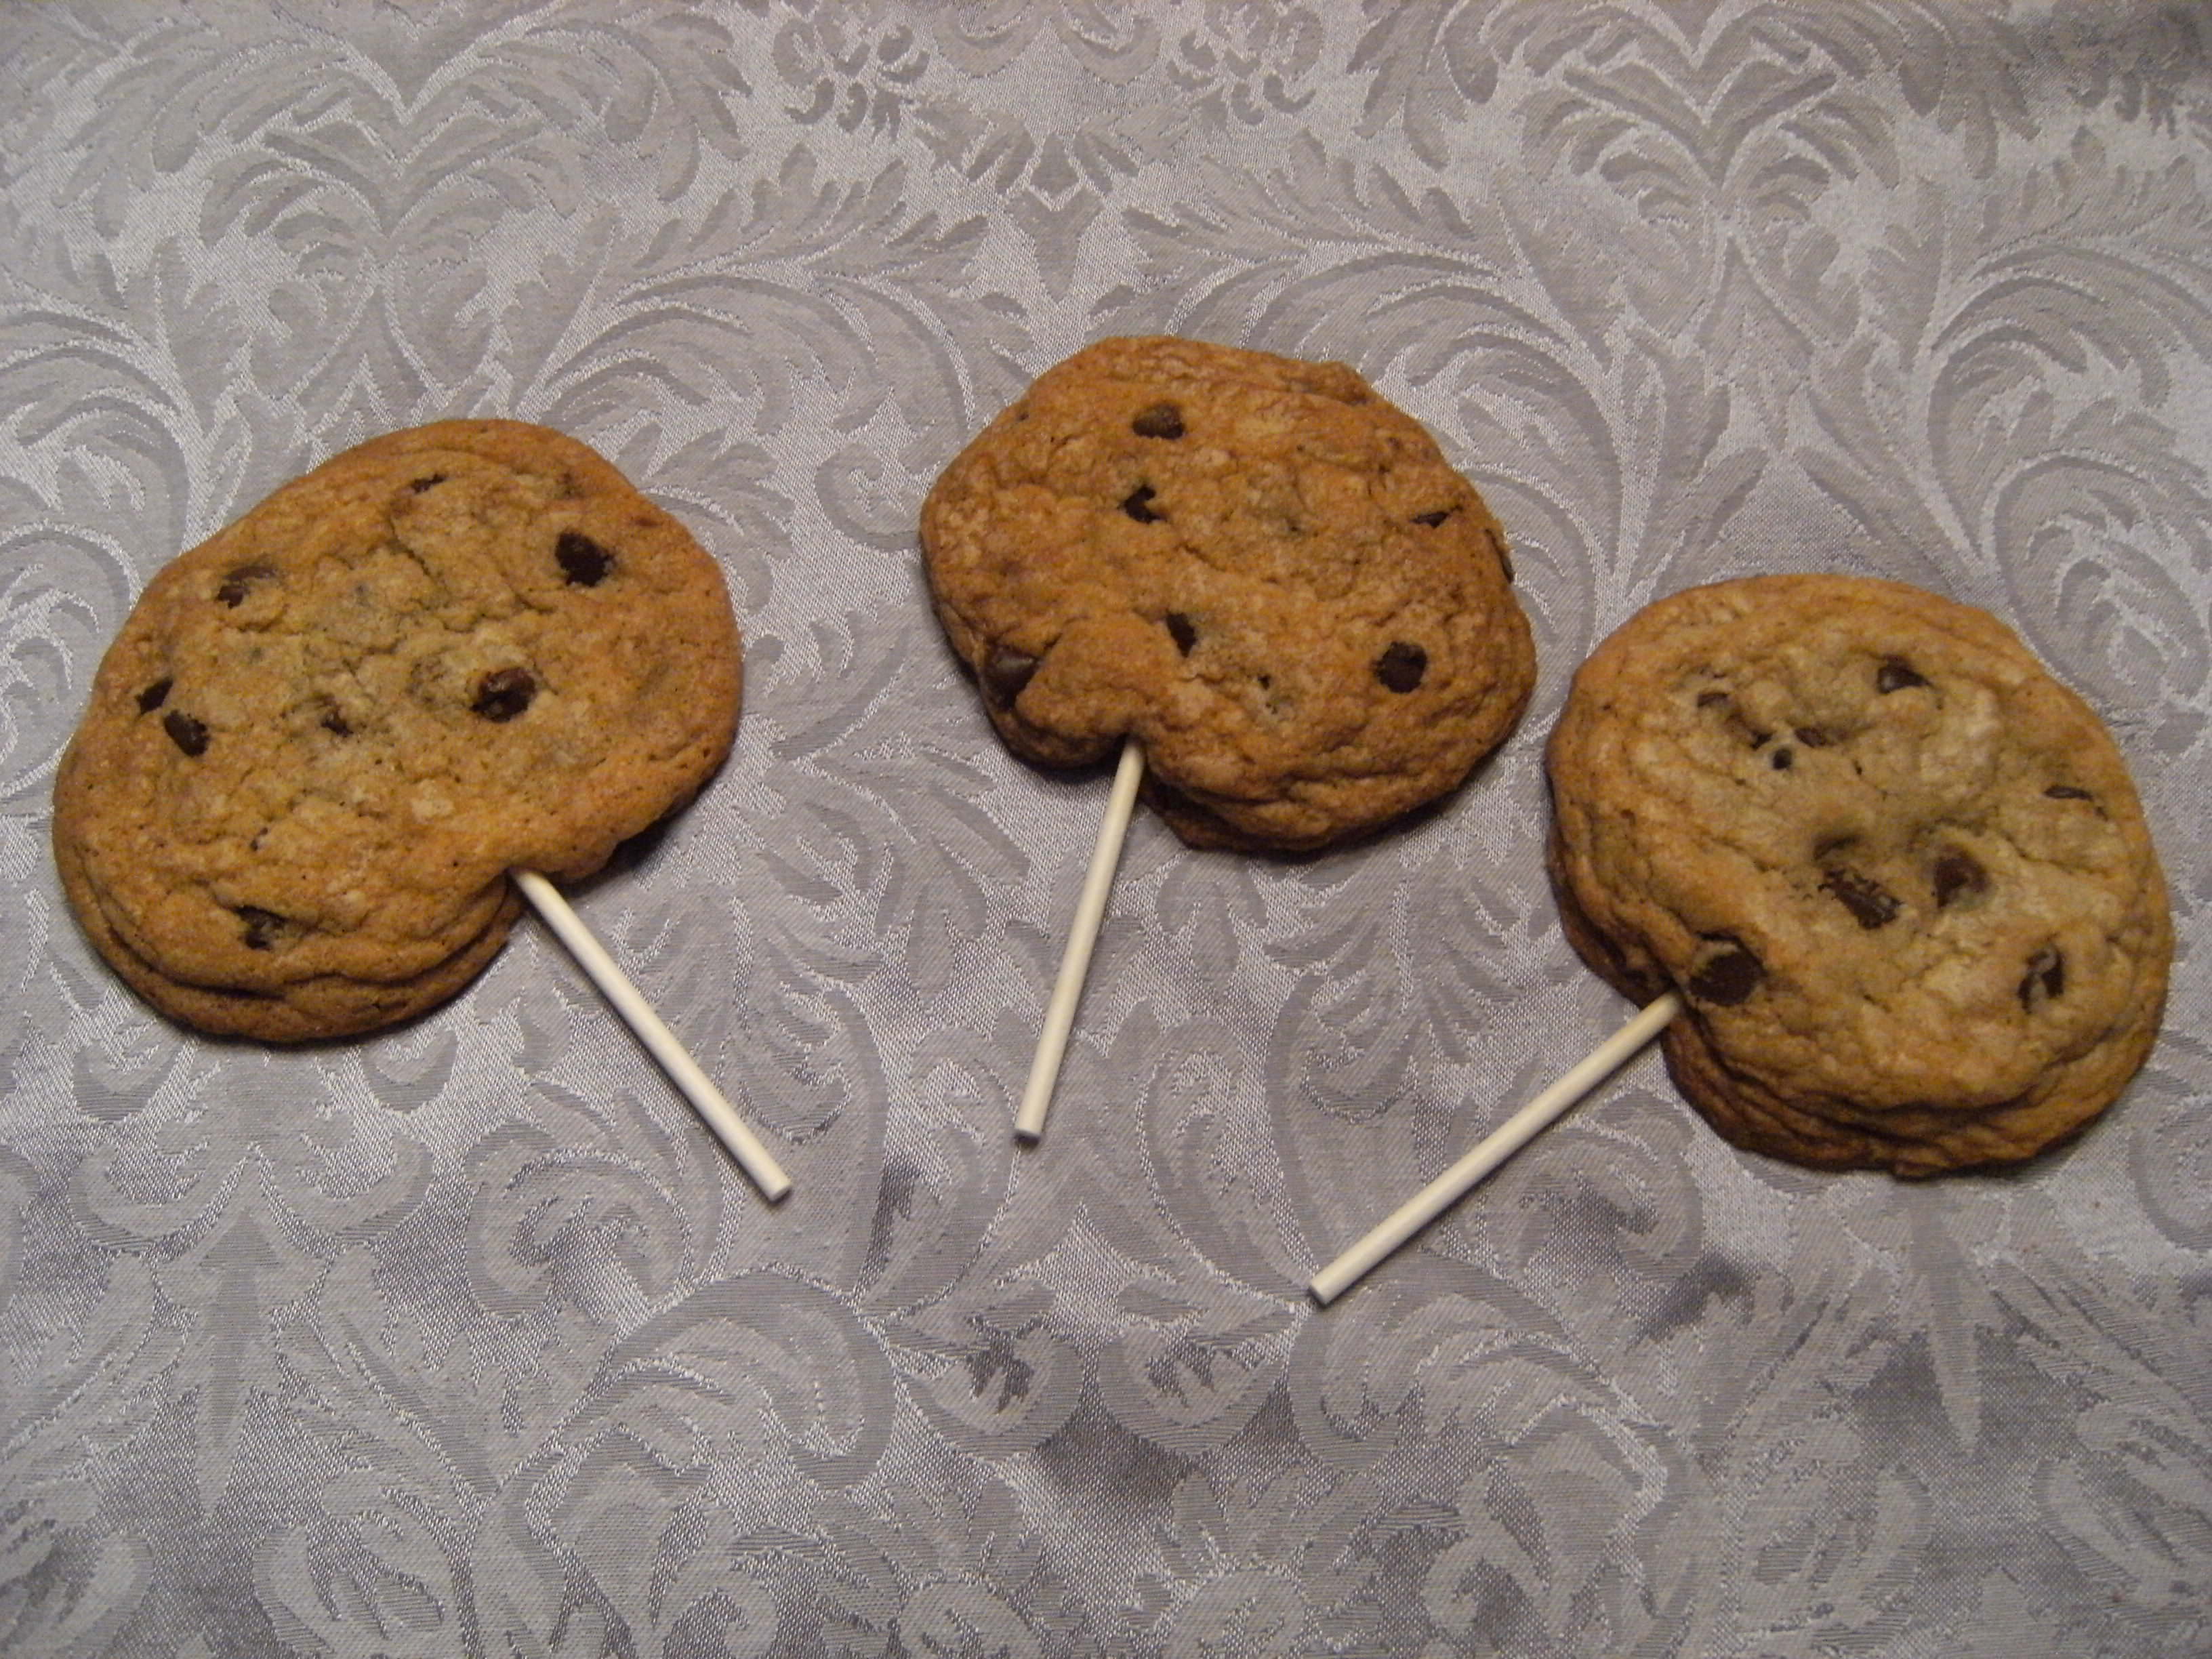 My favorite chocolate chip cookie recipe, turned into chocolate chip cookie pops!